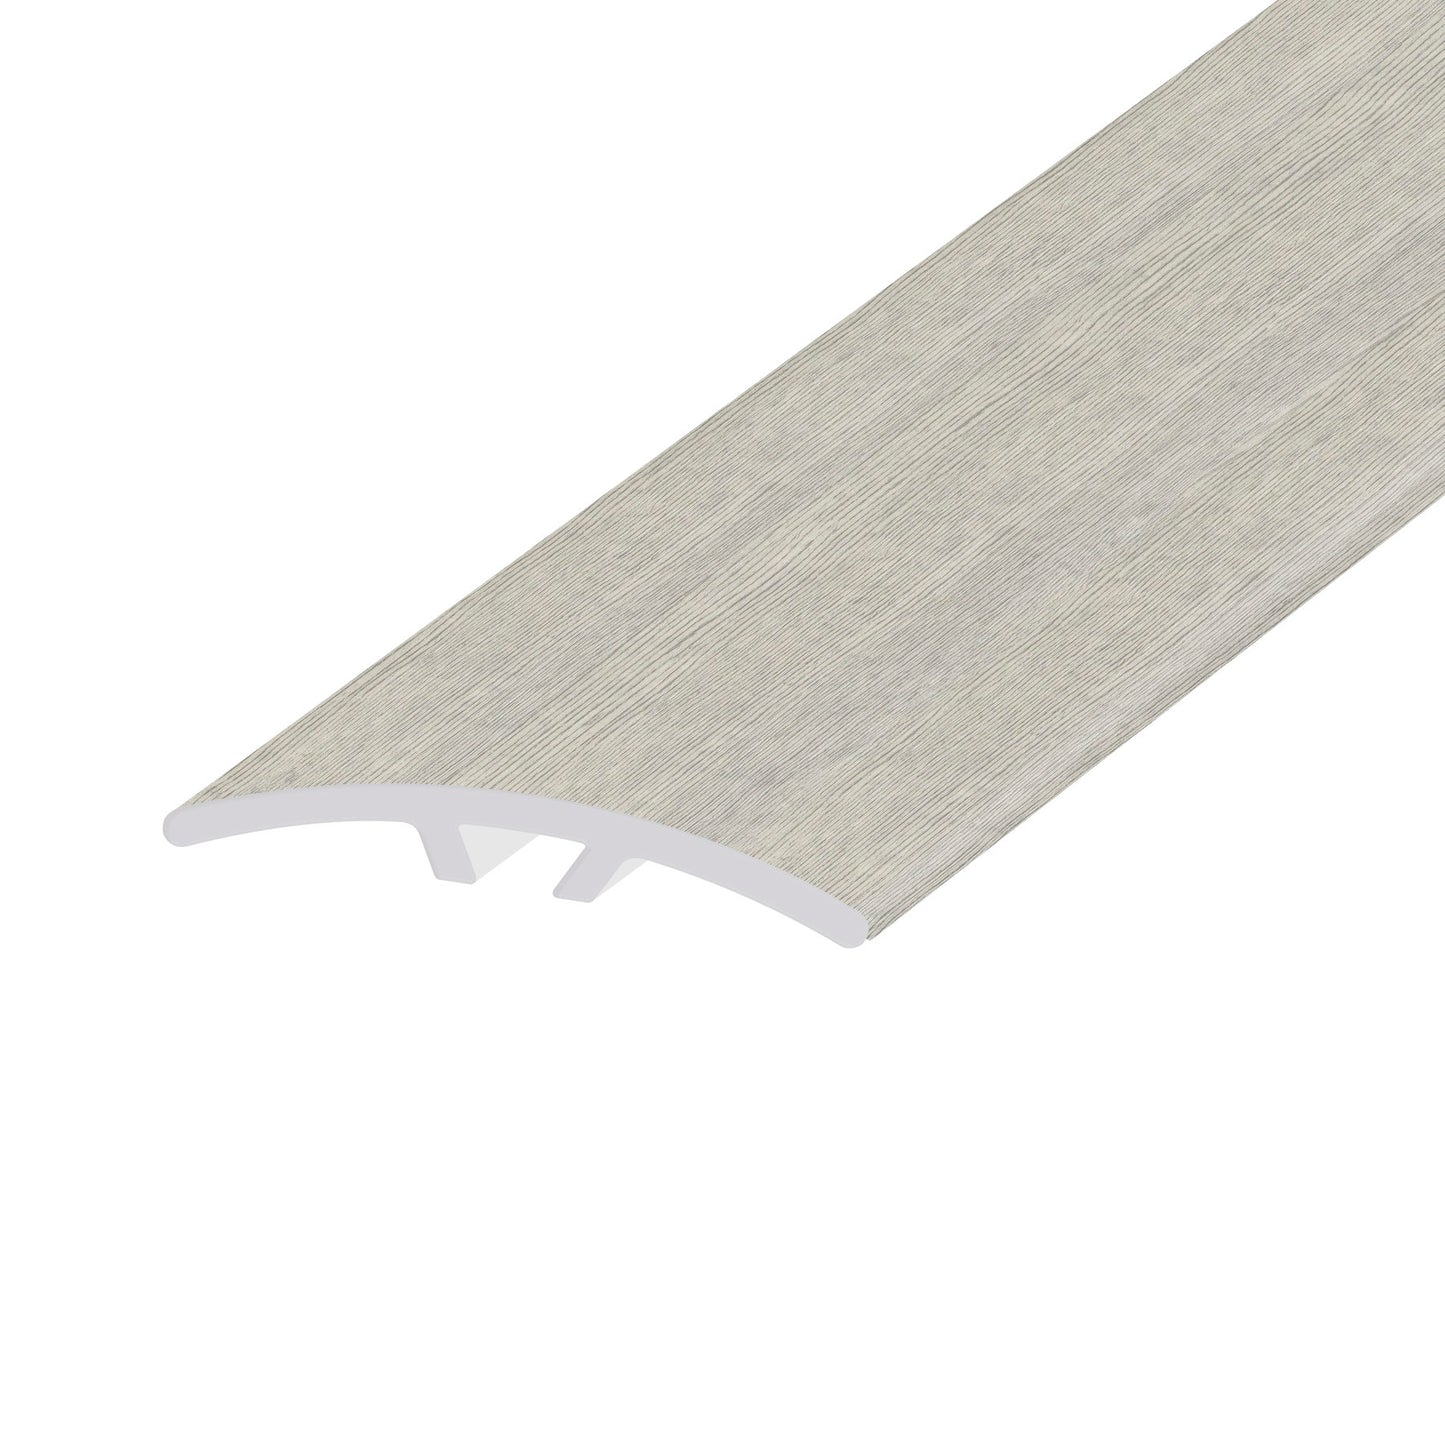 Morning Frost 0.23 in. Thich x 1.59 in. Width x 94 in. Length Multi-Purpose Reducer Vinyl Molding